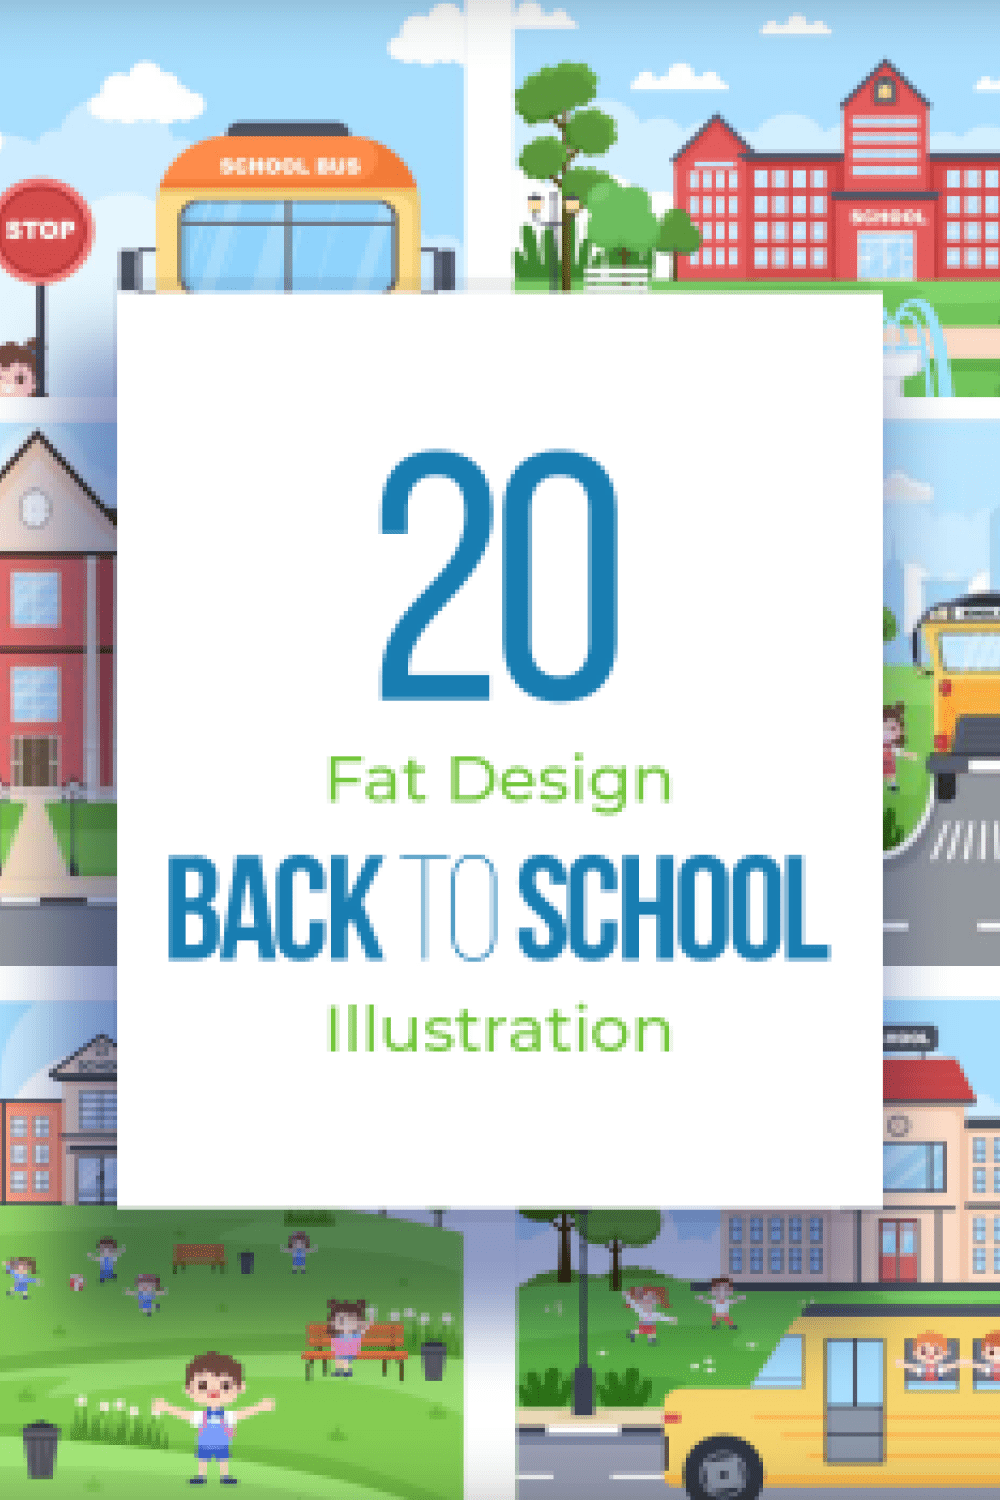 20 Back To School and Cute Bus Illustrations - MasterBundles - Pinterest Collage Image.